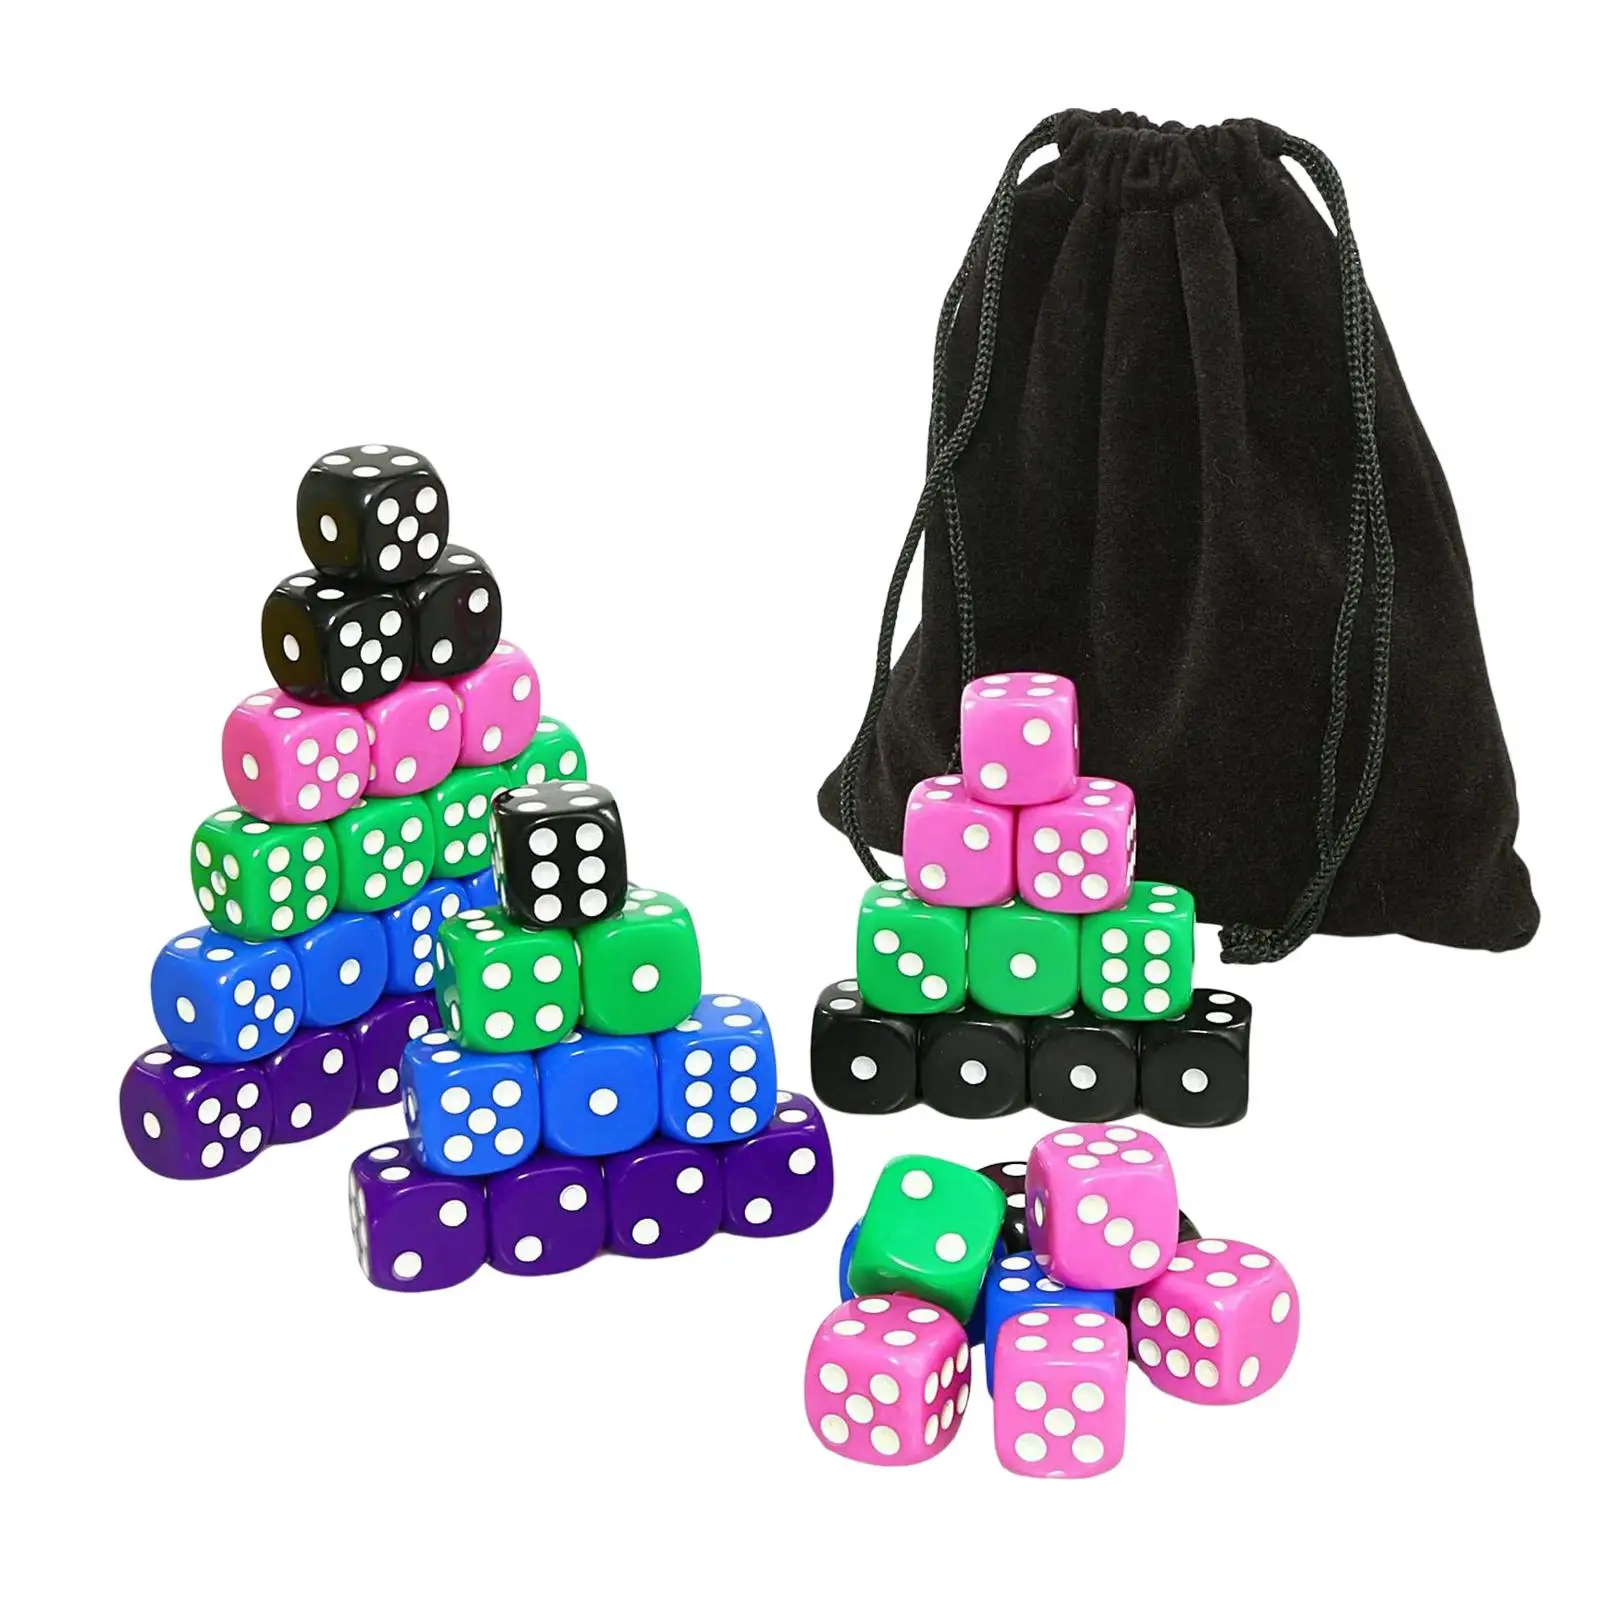 50 Pieces D6 6 Sided Dice Set with Velvet Pouch Party Toys for MTG 16mm Acrylic Dice Math Teaching Board Game Role Playing Games